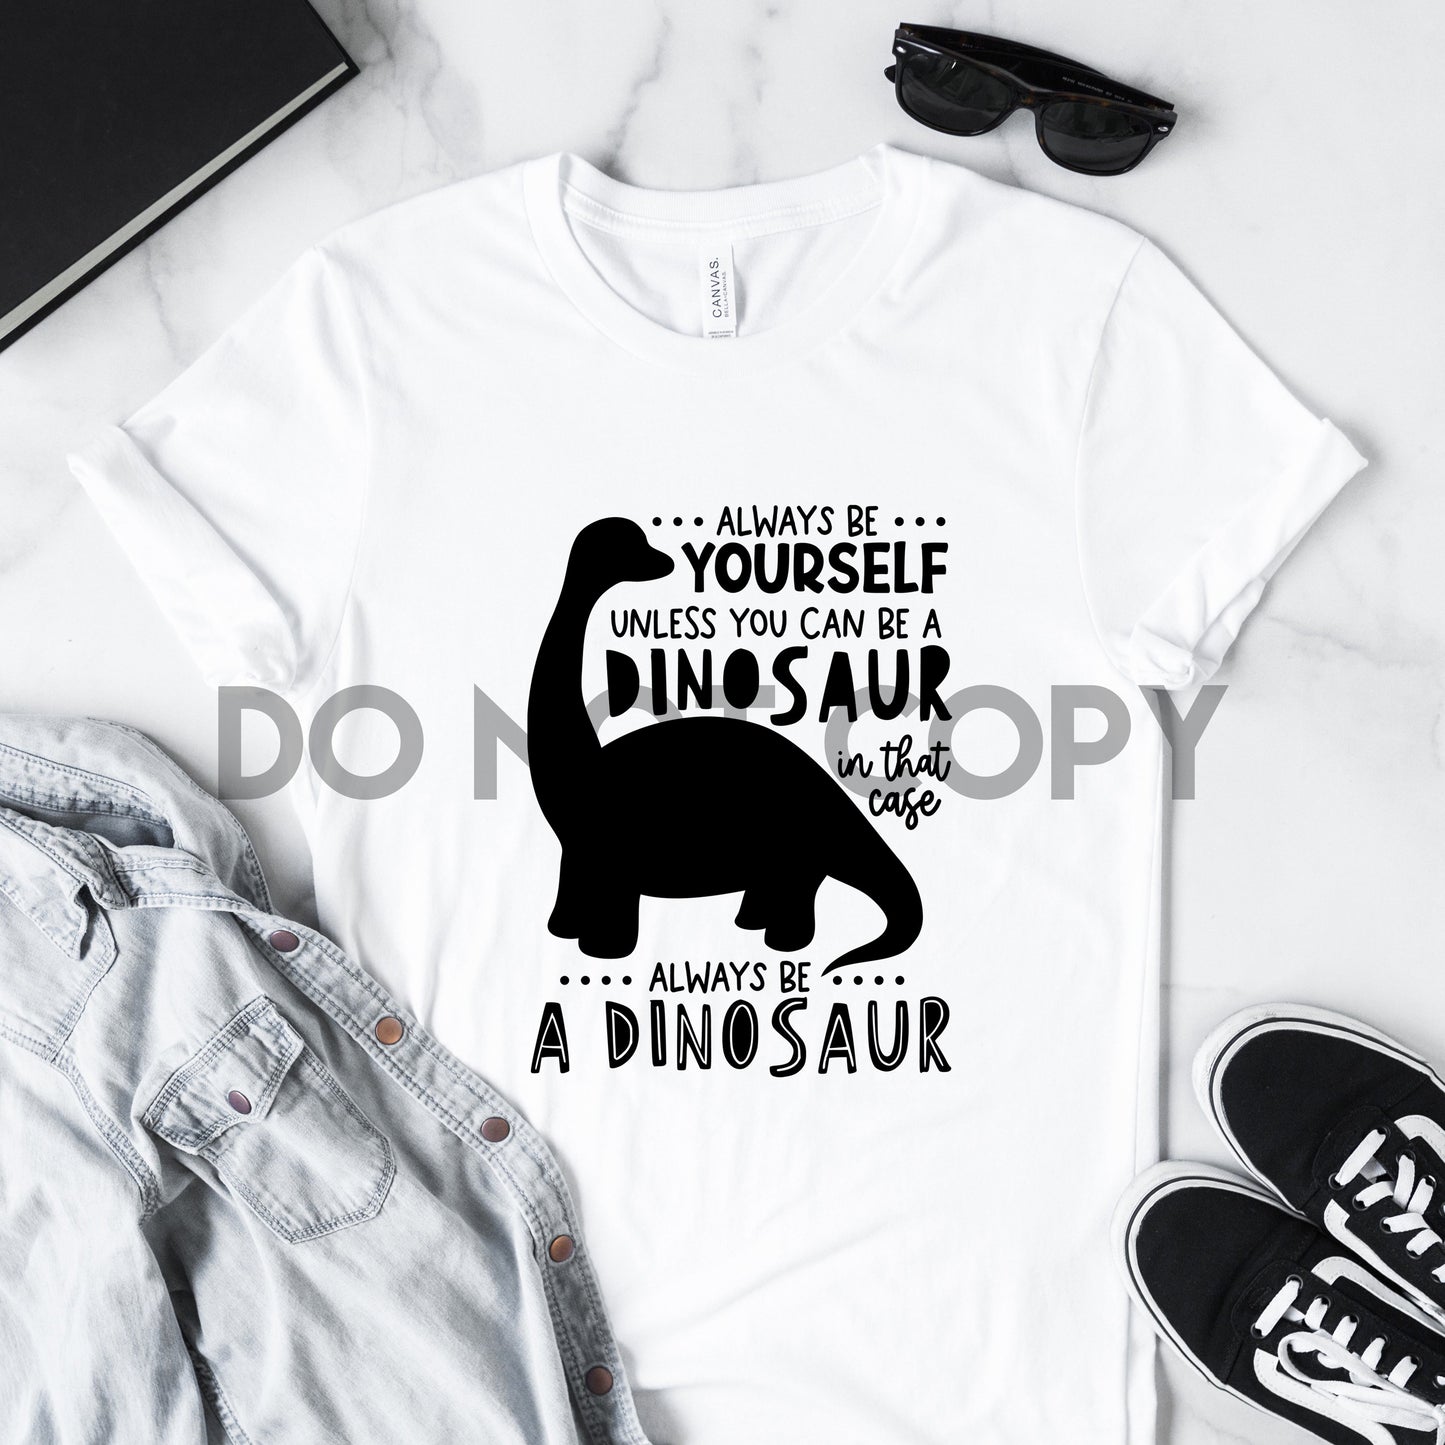 Always be yourself unless you can be a Dinosaur, in that case always be a Dinosaur Dream Print or Sublimation Print